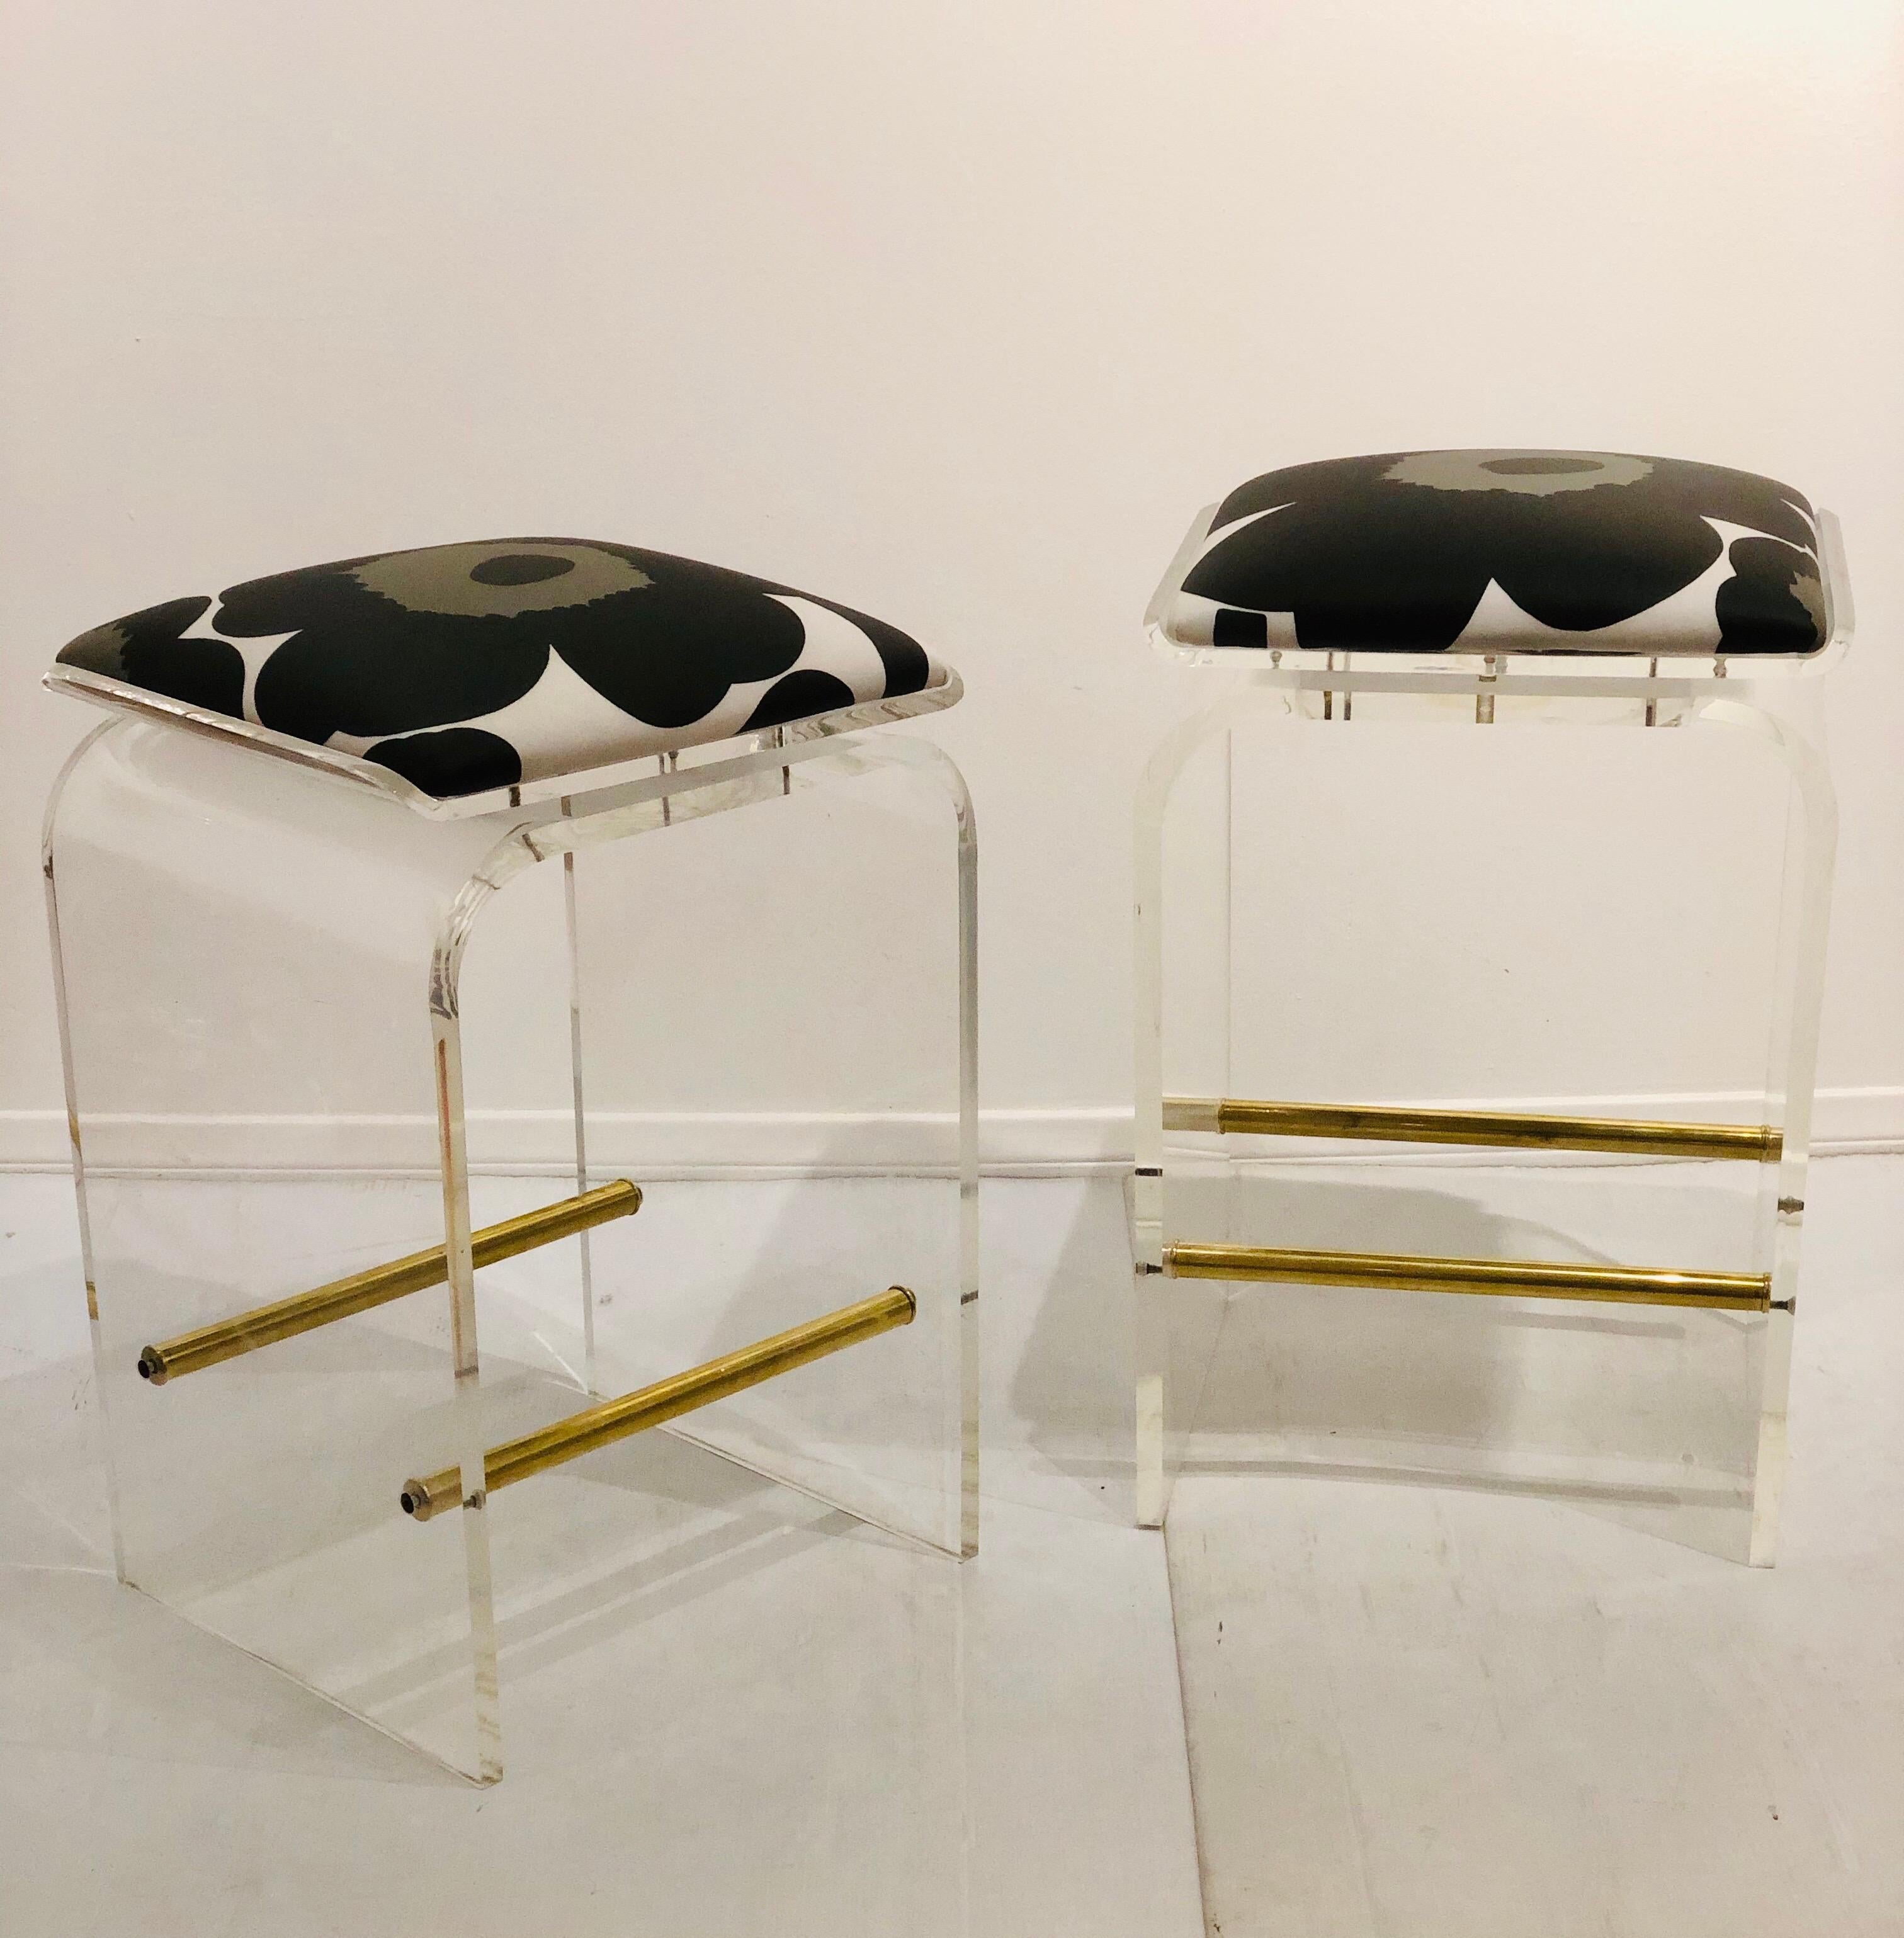 Beautiful pair of Charles Hollis Jones waterfall bar stools in Lucite with swiveling seats, new Maharam Pop upholstery waterproof, new fresh brass polished footrest bars, these pair has been hand polished the seats swivel to 360 degrees, a very nice